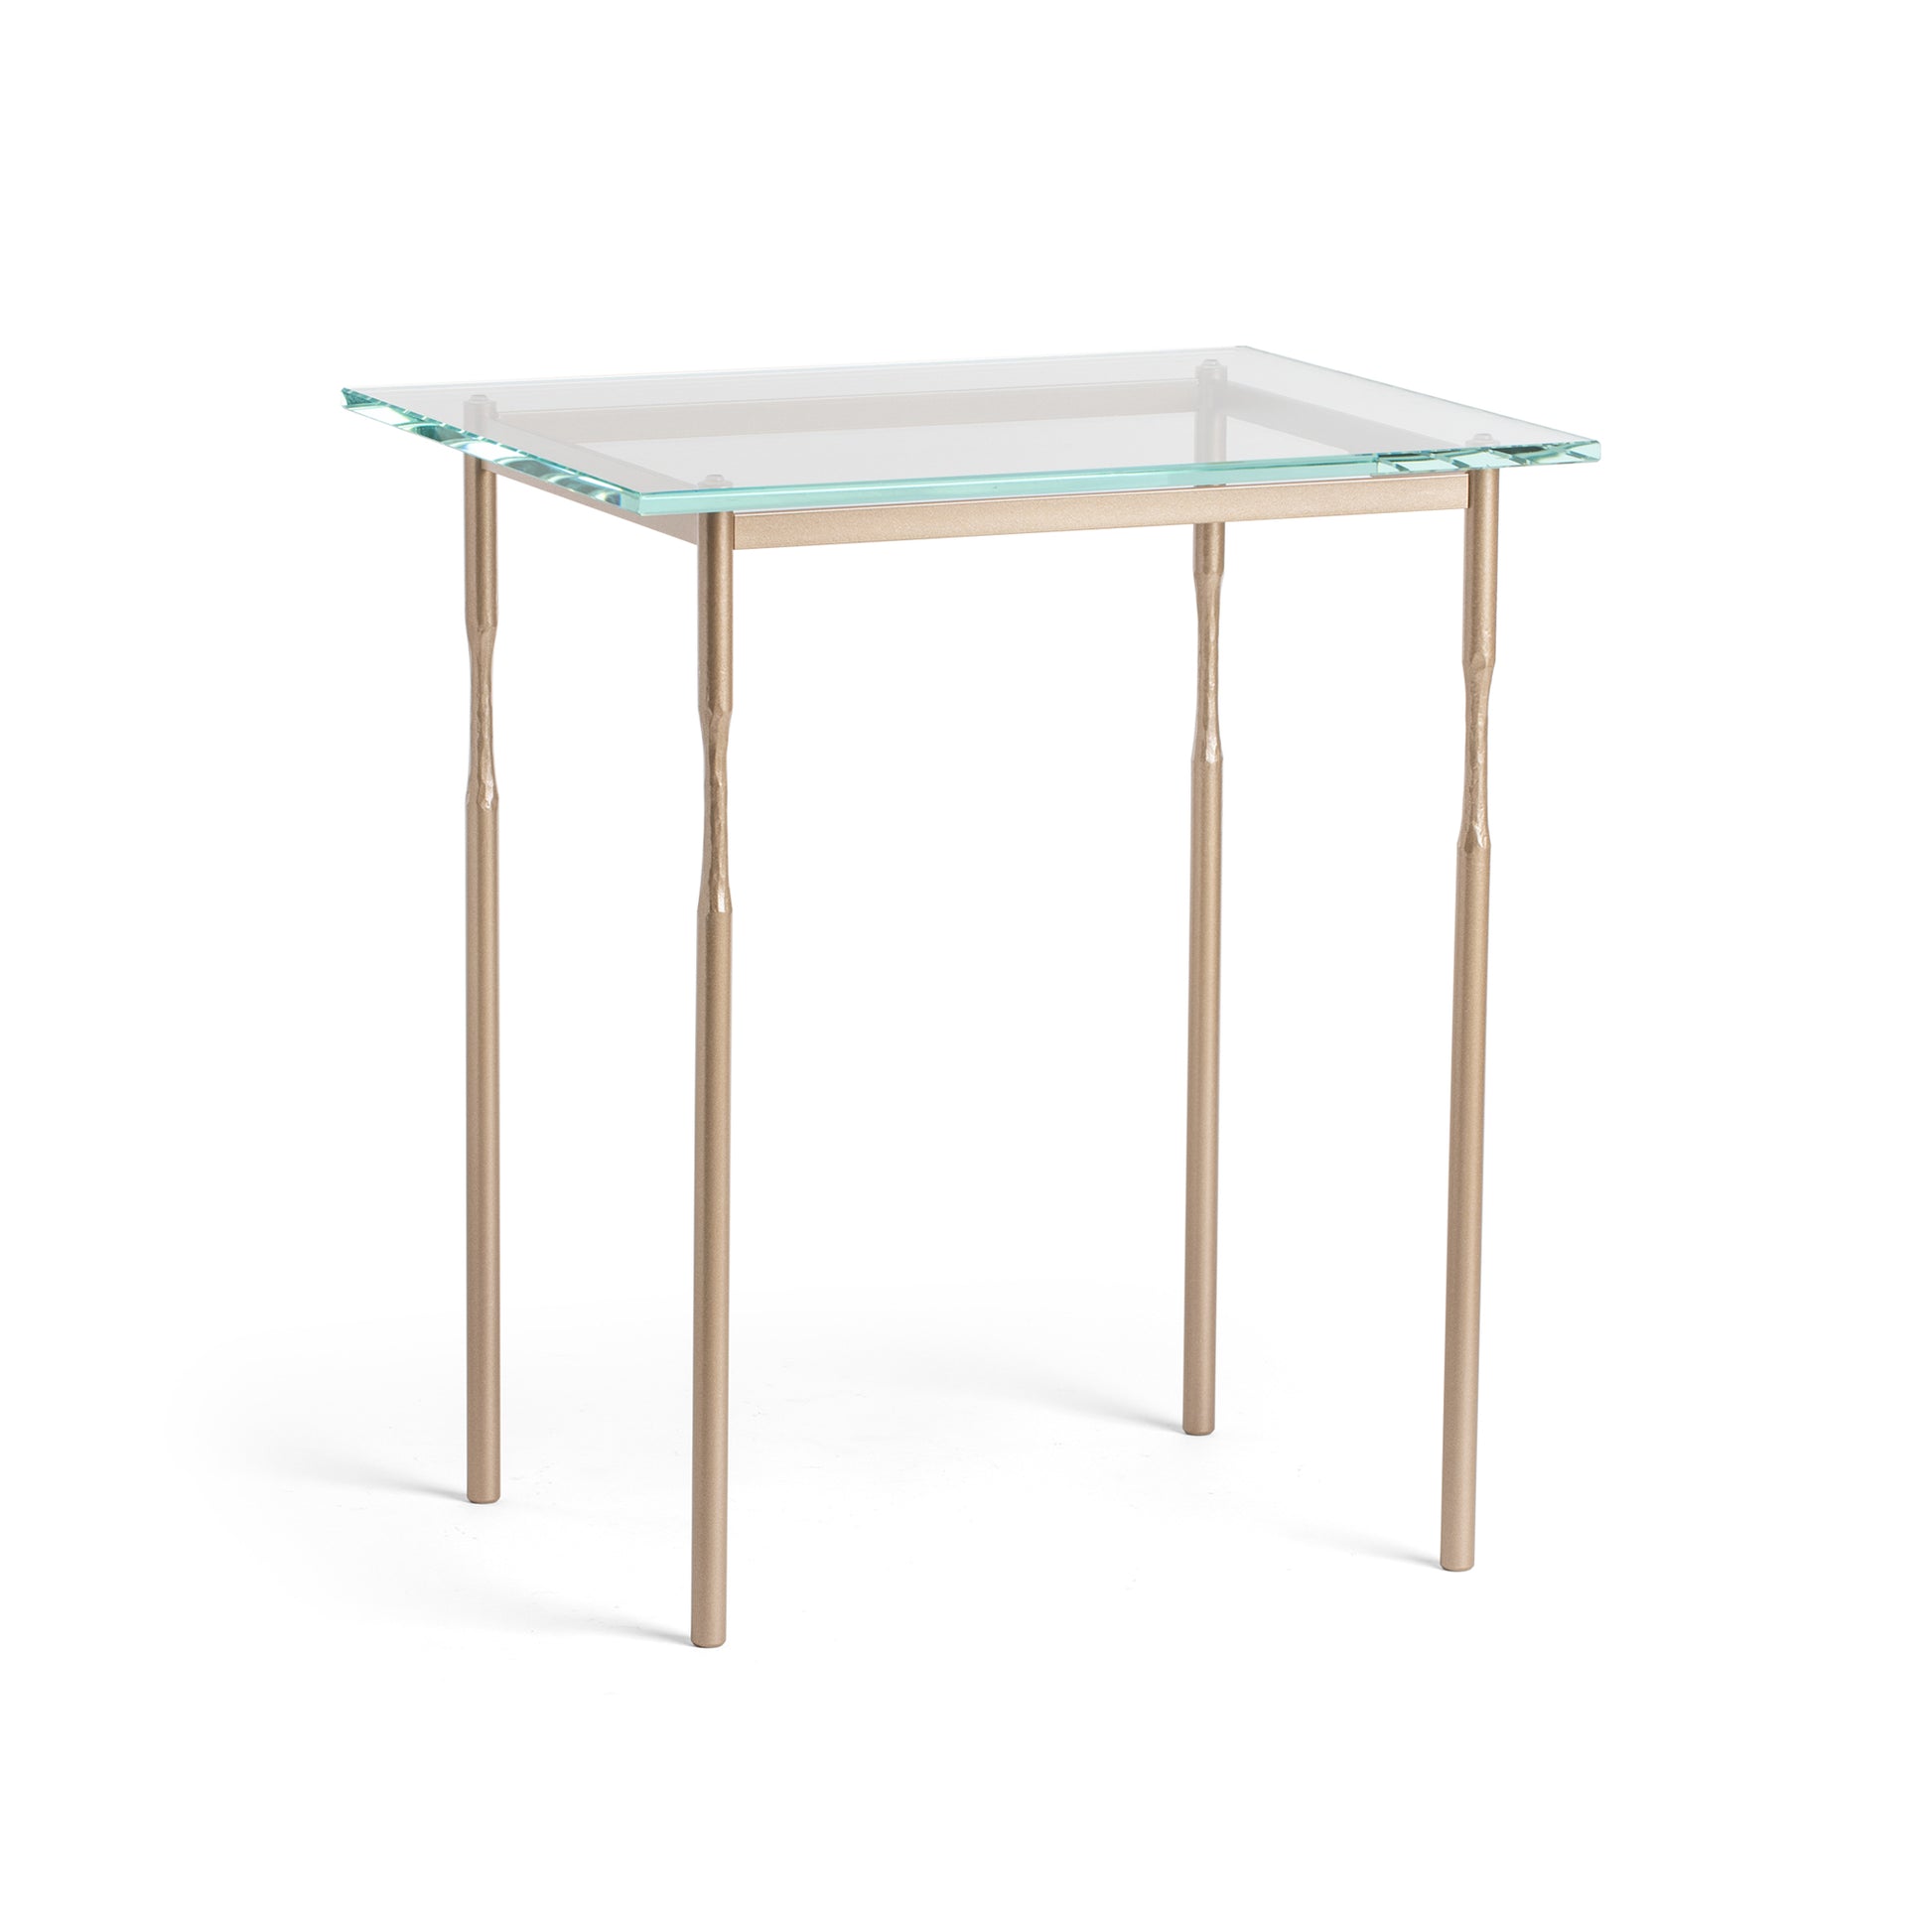 The Hubbardton Forge Senza Side Table is a modern addition to any home. With its fine tailoring and elegant design, this end table features a glass top and gold legs, adding a touch of sophistication.